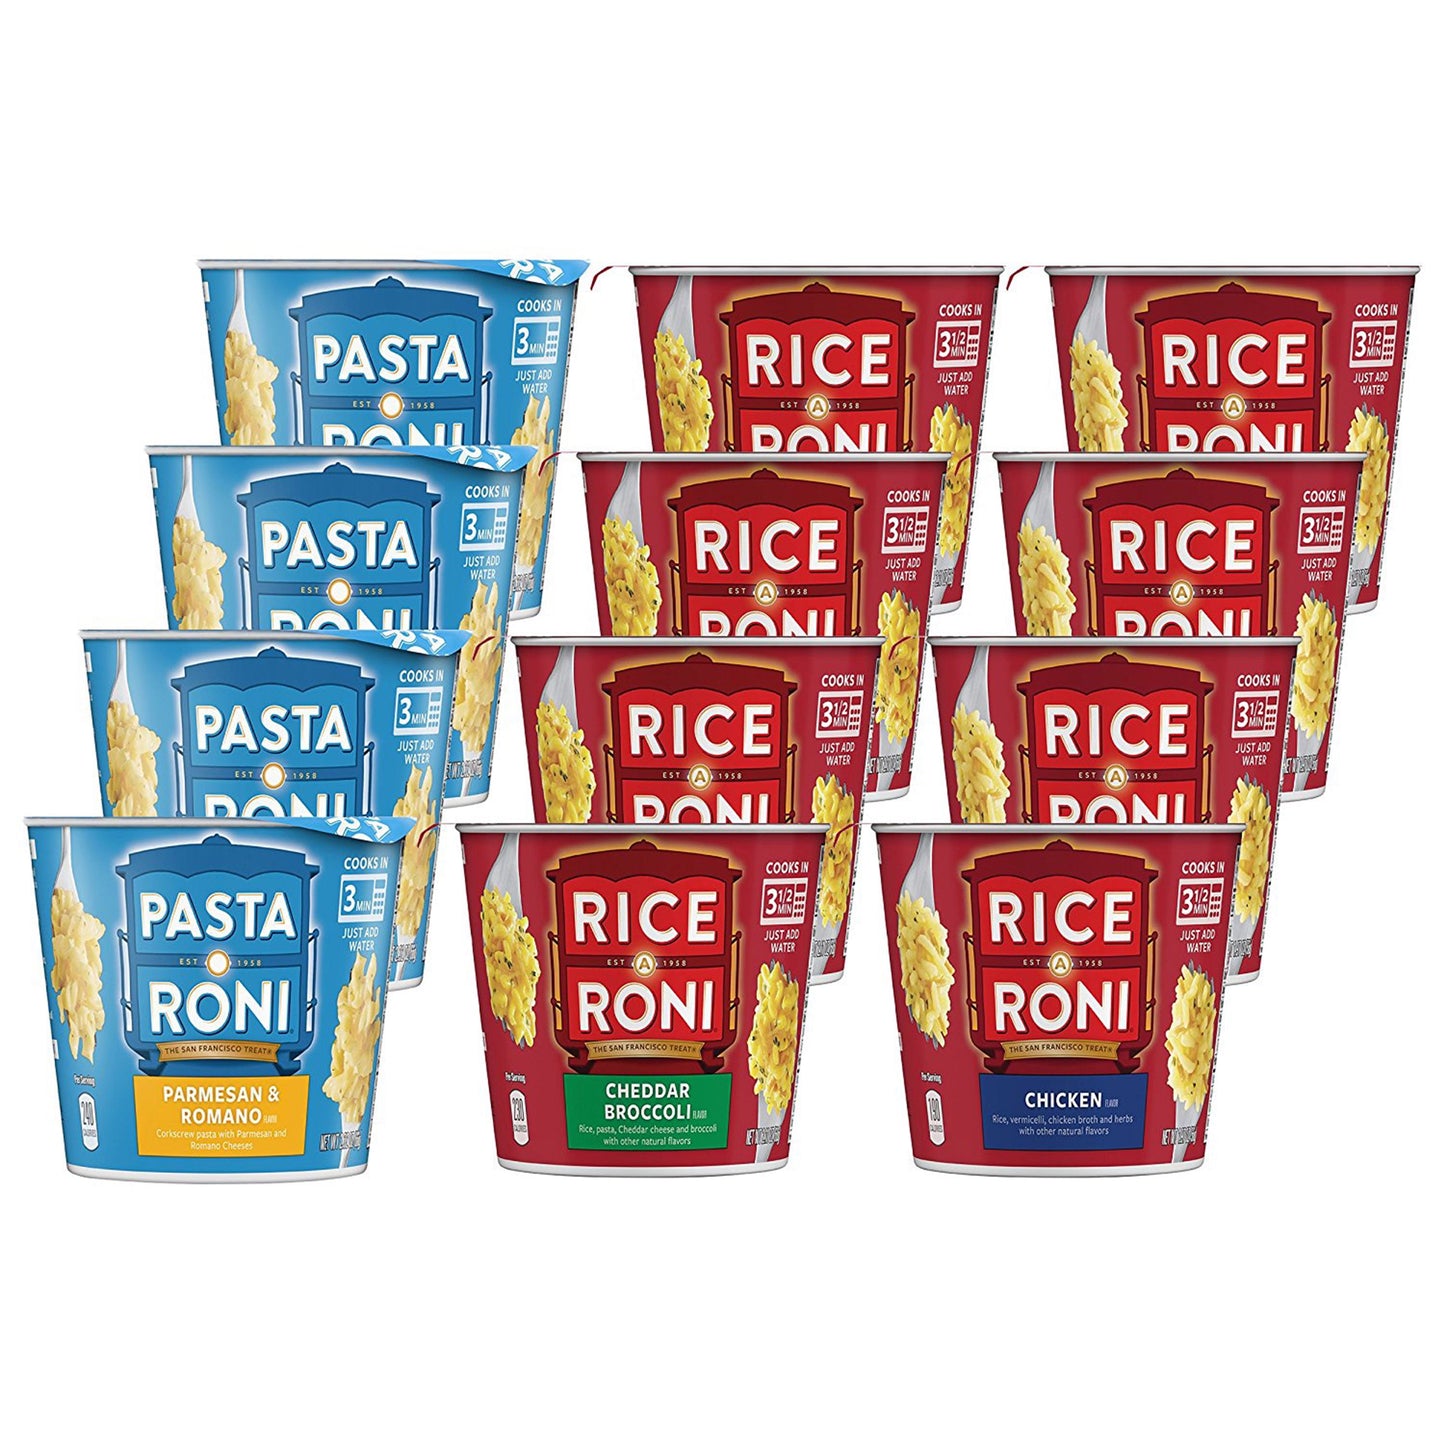 & Pasta Roni Variety Pack Box, 12 Cups